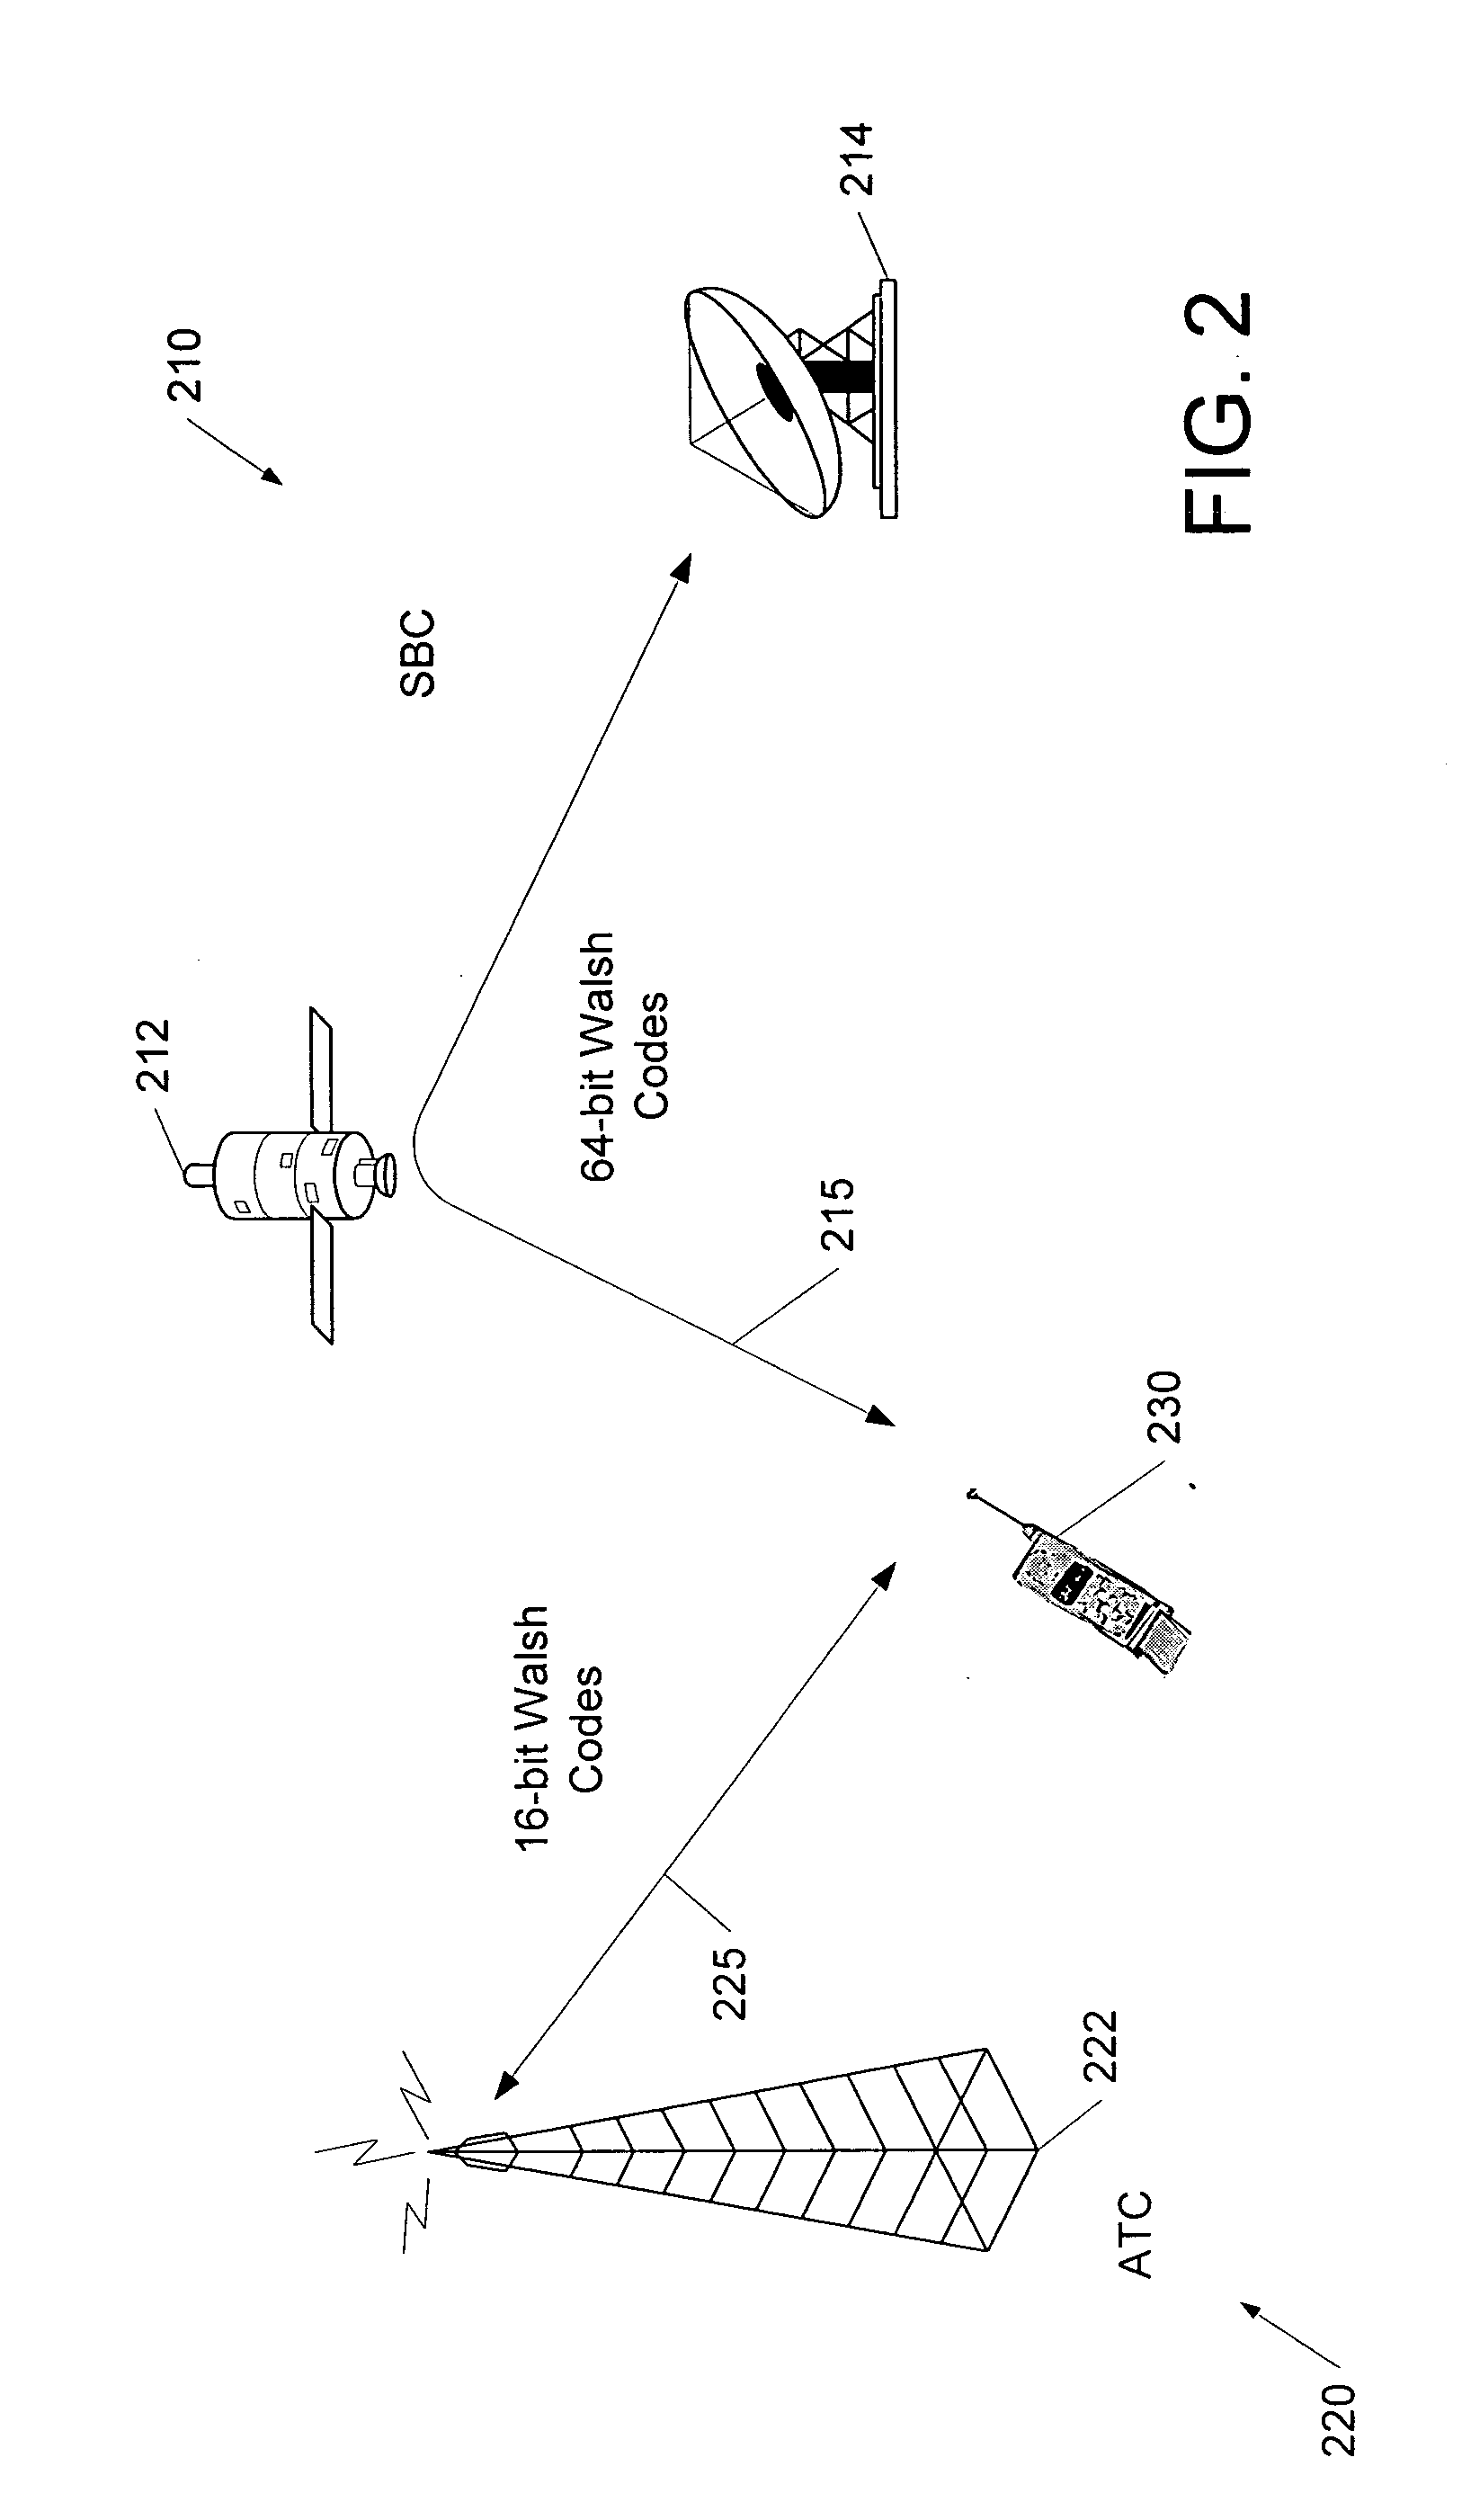 Satellite/terrestrial wireless communications systems and methods using disparate channel separation codes